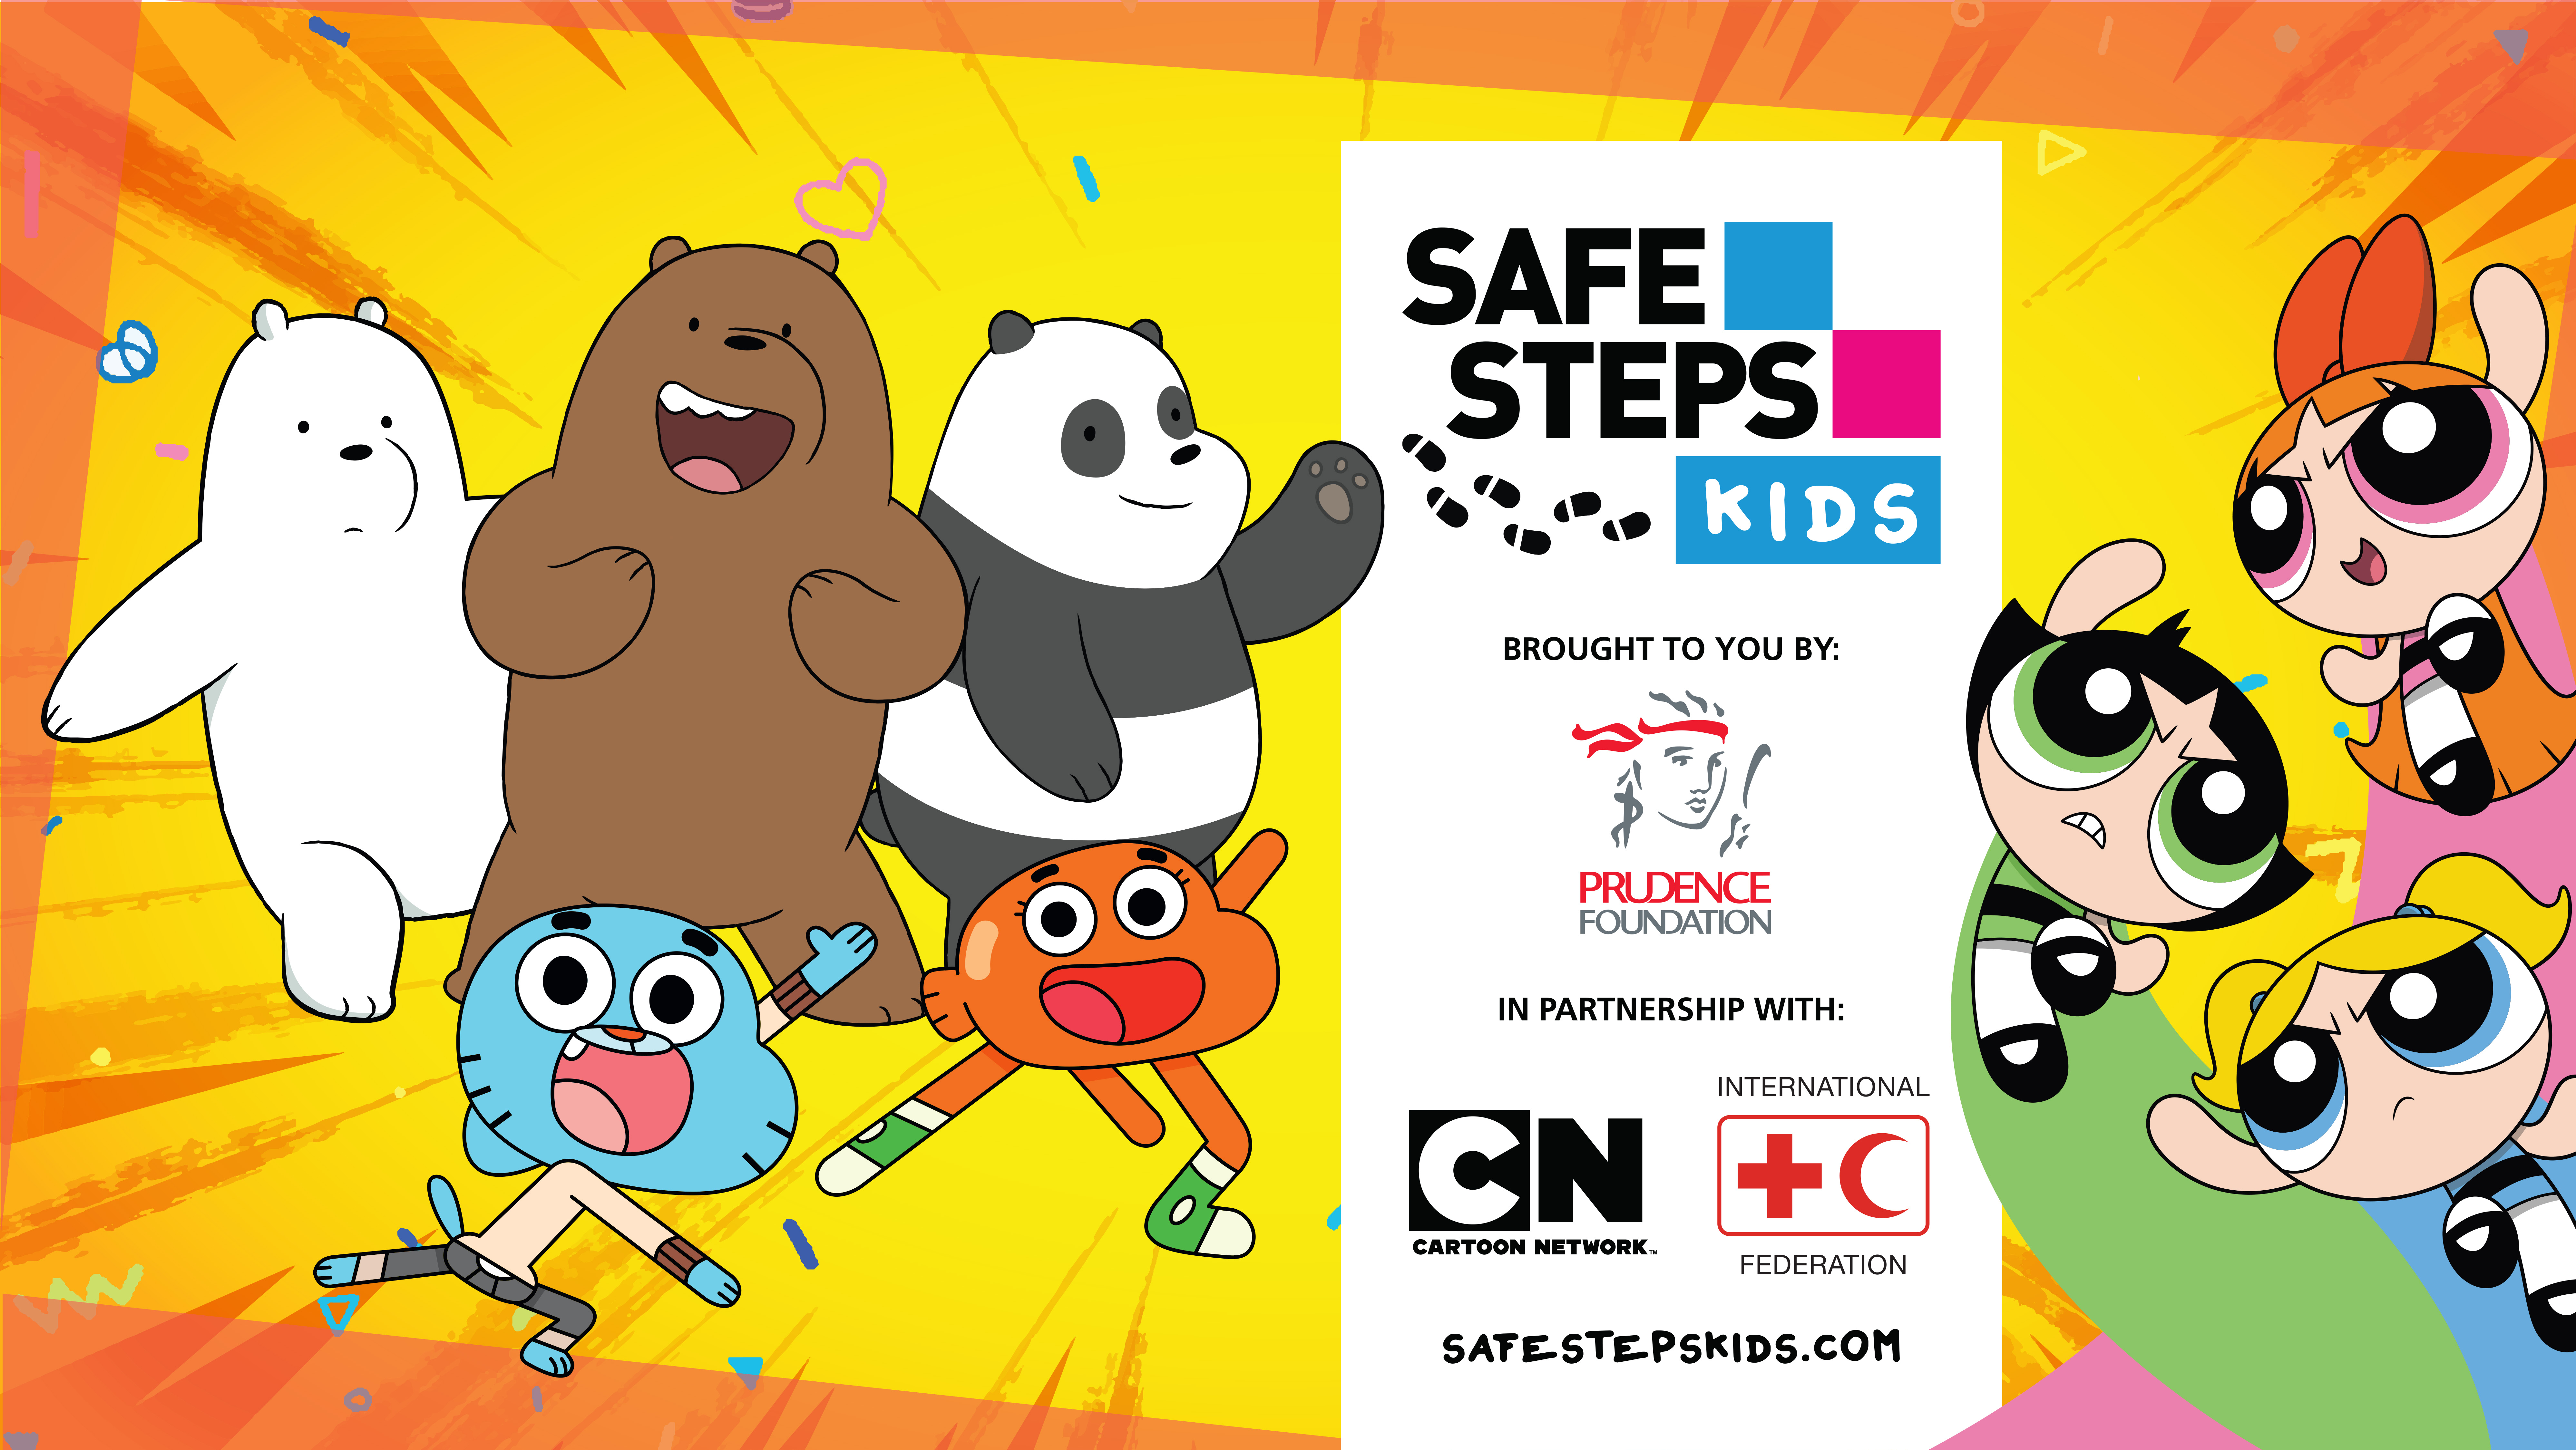 Prudence Foundation, IFRC and Red Crescent Societies and Cartoon Network team up to present safety information in a fun and innovative way